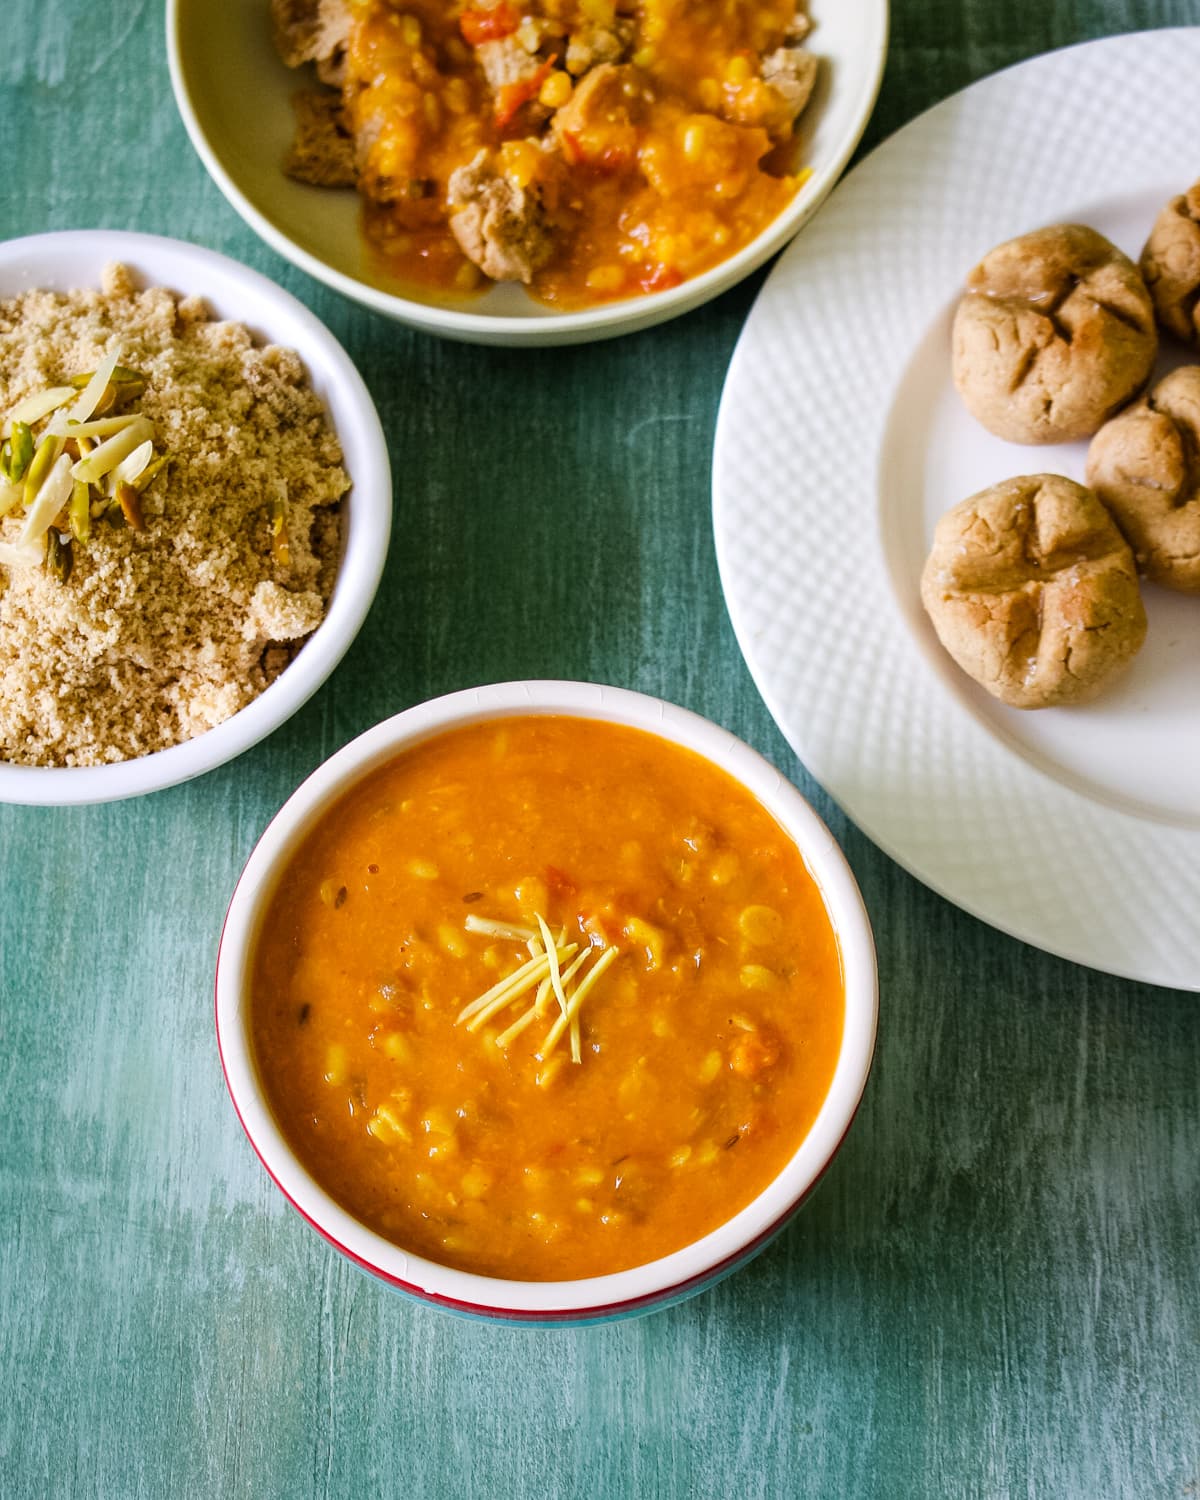 A bowl of panchmel dal garnished with ginger and churma, bati, dal bati on the side.